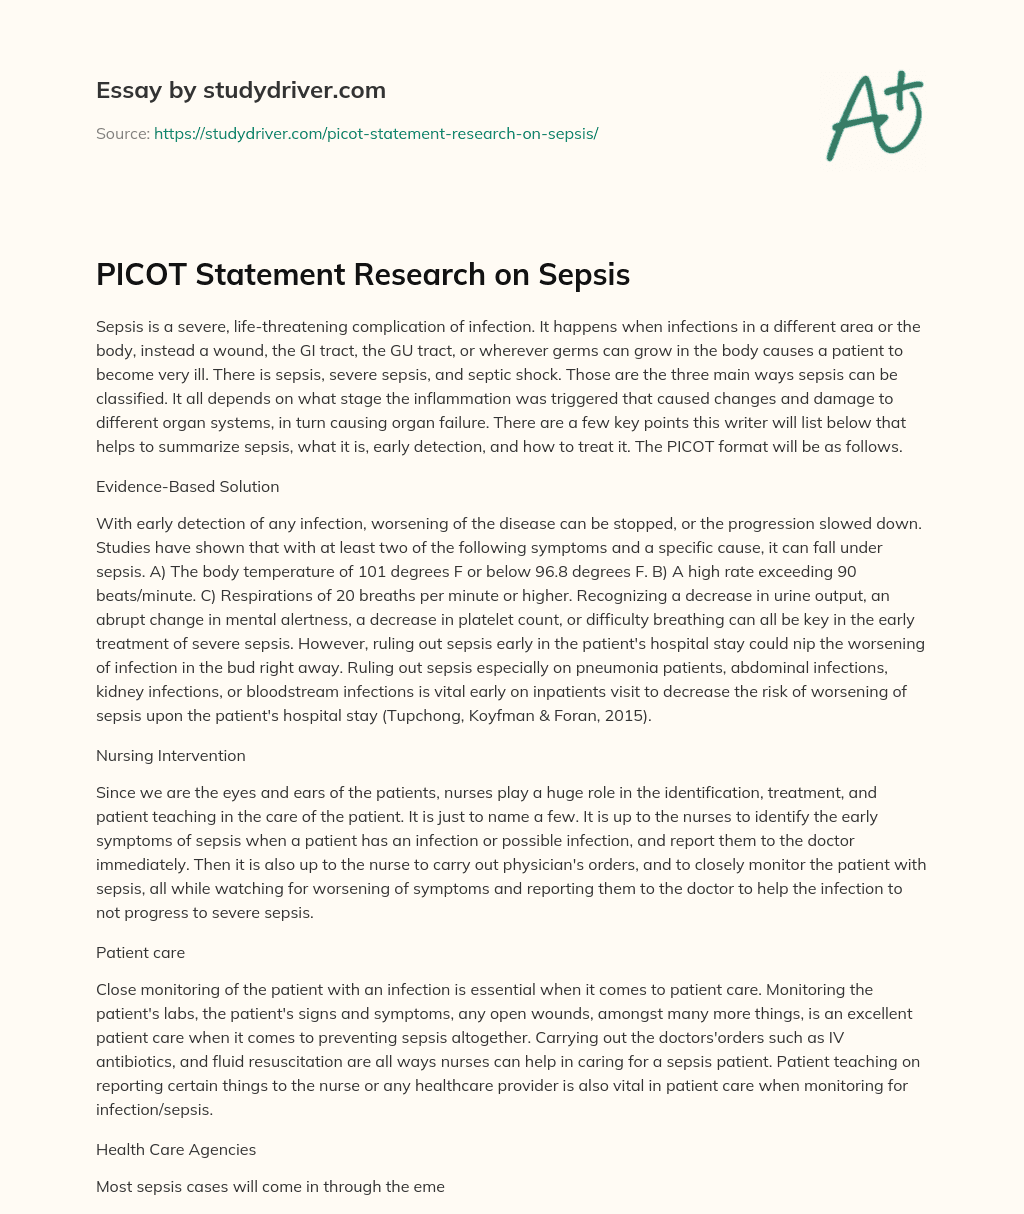 PICOT Statement Research on Sepsis essay